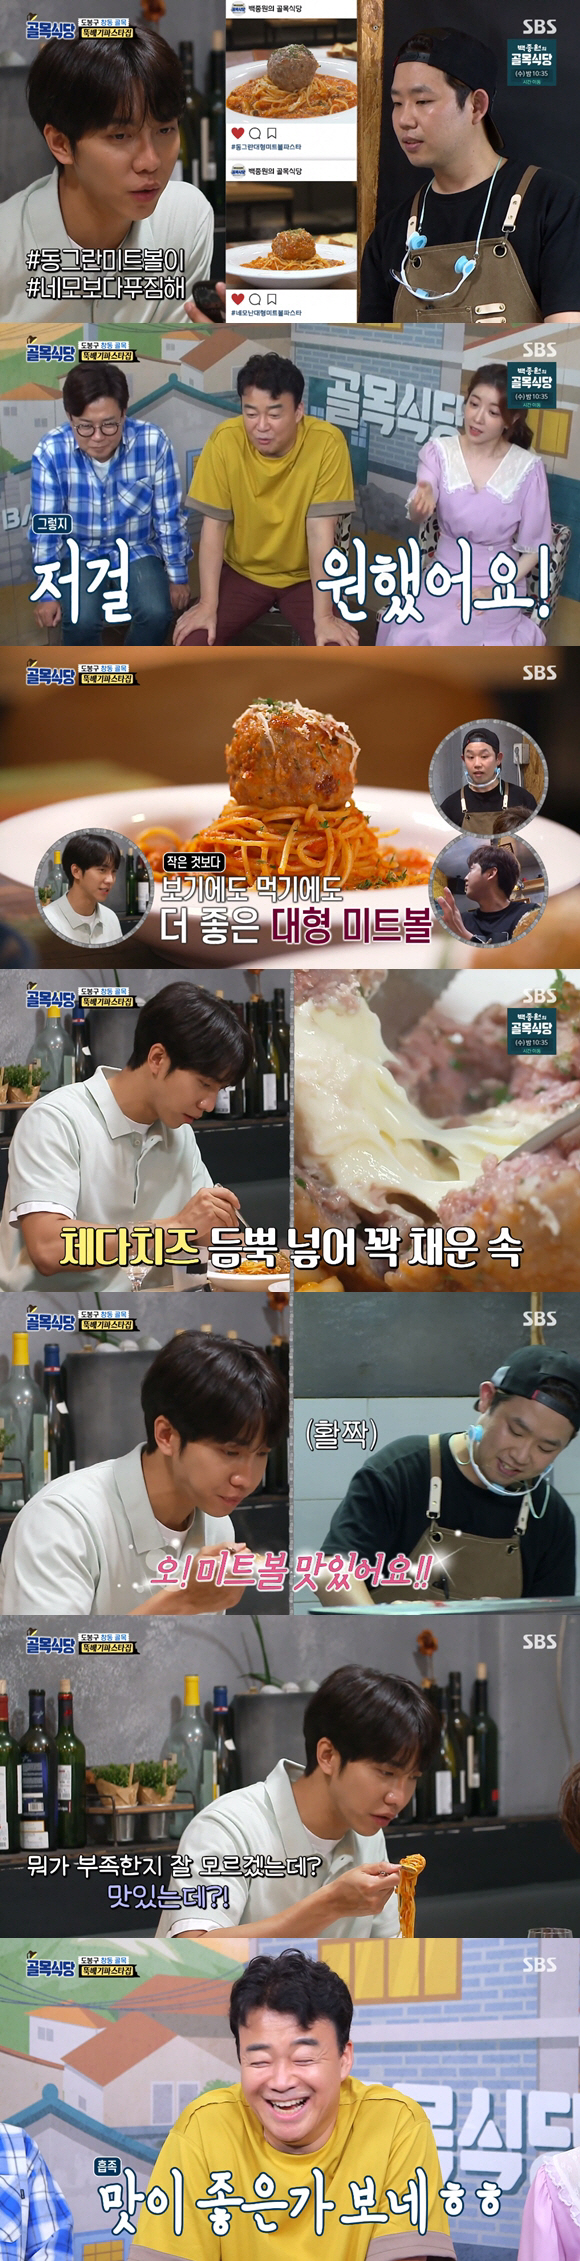 Lee Seung-gi is on SBS Baek Jong-wons The Ally Restaurant.The alley restaurant, which was broadcasted on the 19th, was released on the 25th alley Dobong District Chang-dong Alley.On this day, Lee Seung-gi, a singer of Mirry Tour, appeared in the alley.Kim Seong-joo said, The big guest came, he said. Since I first came to Chang-dong, I have to come to Lee Seung-gi like a cubic.If you do not know Lee Seung-gi, he is a spy, he said.I really admire Baek Jong-won, Seung-gi said on the day. Yang Se-hyeong arranged a meeting in the middle, but it was not possible.I thought it was a Baek Jong-won situation at first. Baek Jong-won said, I thought it was Lee Seung-gi.But it was a situation for Yang Se-hyeong, he added.Lee Seung-gi, who is known from Dobong District, visited the Ttukbaegi Pasta House after receiving a special mission from Baek Jong-won.Earlier, Baek Jong-won advised that the bosss meatball Pasta lacks personality and changed it to a special visual, and asked Lee Seung-gi to give a cool evaluation of the new visual meatball Pasta, which the boss reshaped.Lee Seung-gi, who tasted the bosss Pasta, praised it as perfect and continued to storm food.On the other hand, MC Jung In-sun was put in the Chicken Gangjeong House, a manga duo that was possessed from the first shooting to the heart of the guest as well as the guest, and decided to check the homework that the bosses studied for a week.However, Jung In-sun also attracted attention by showing the crisis that was shaken by the colorful talks of the two bosses.Baek Jong-won pointed out the sticky texture problem without crispy even though the bosss chicken gangjeong was Gangjeong, and put 2MC of Seodanggae Association into the store to find a solution.MC Kim Seong-joo helped the bosses study their texture through simple experiments, starting with the difference between chicken gangjeong and seasoned chicken.In the NO Delivery Pizza House, where all 3MCs praised with the help of Valeria Fabrizi Riccio chef last week, Valeria Fabrizi Riccio chef visited again and announced the birth of a new menu Cotalia Pizza with Korean pepper oil added to authentic Italian pizza.Kim Seong-joo X Jung In-sun, who sampled NEW pizza with a swollen expectation, praised it as flavory.